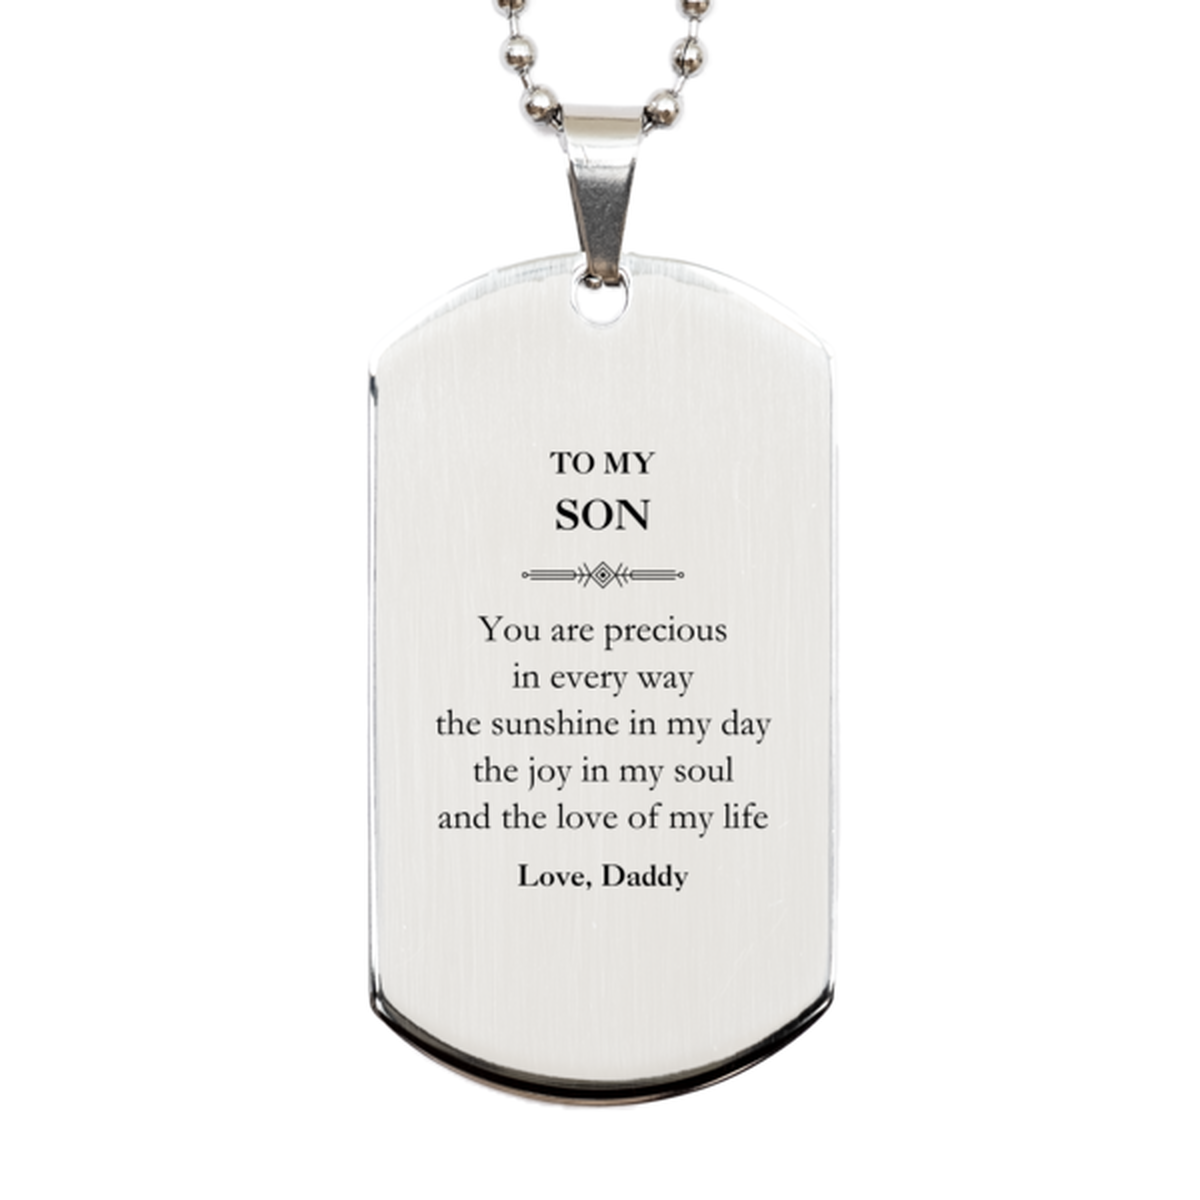 Graduation Gifts for Son Silver Dog Tag Present from Daddy, Christmas Son Birthday Gifts Son You are precious in every way the sunshine in my day. Love, Daddy